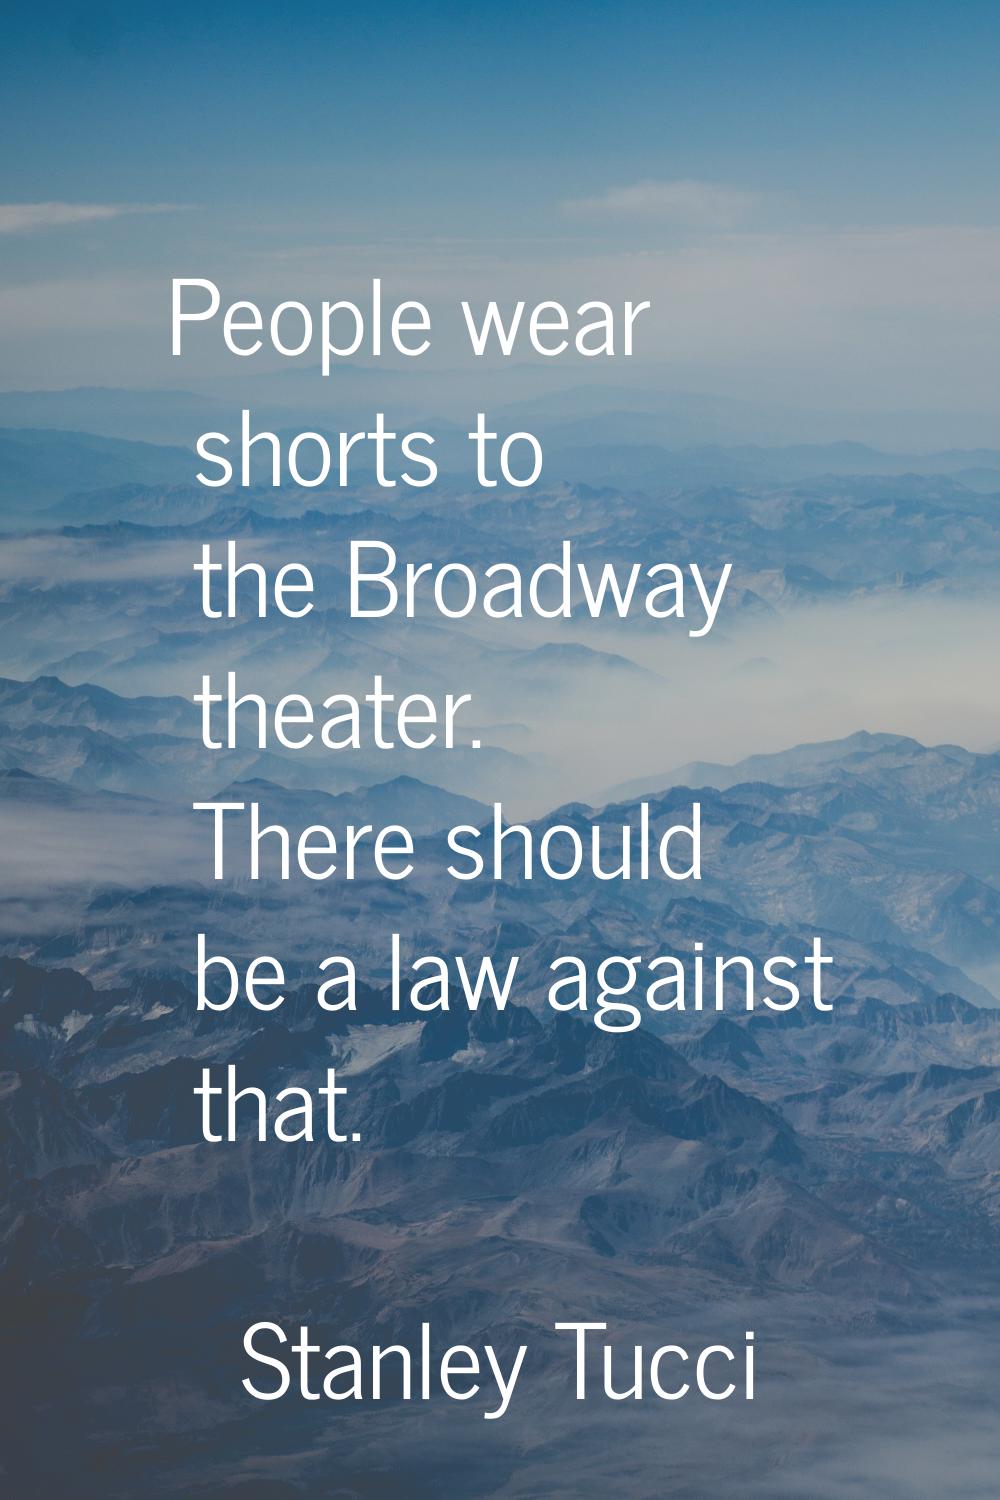 People wear shorts to the Broadway theater. There should be a law against that.